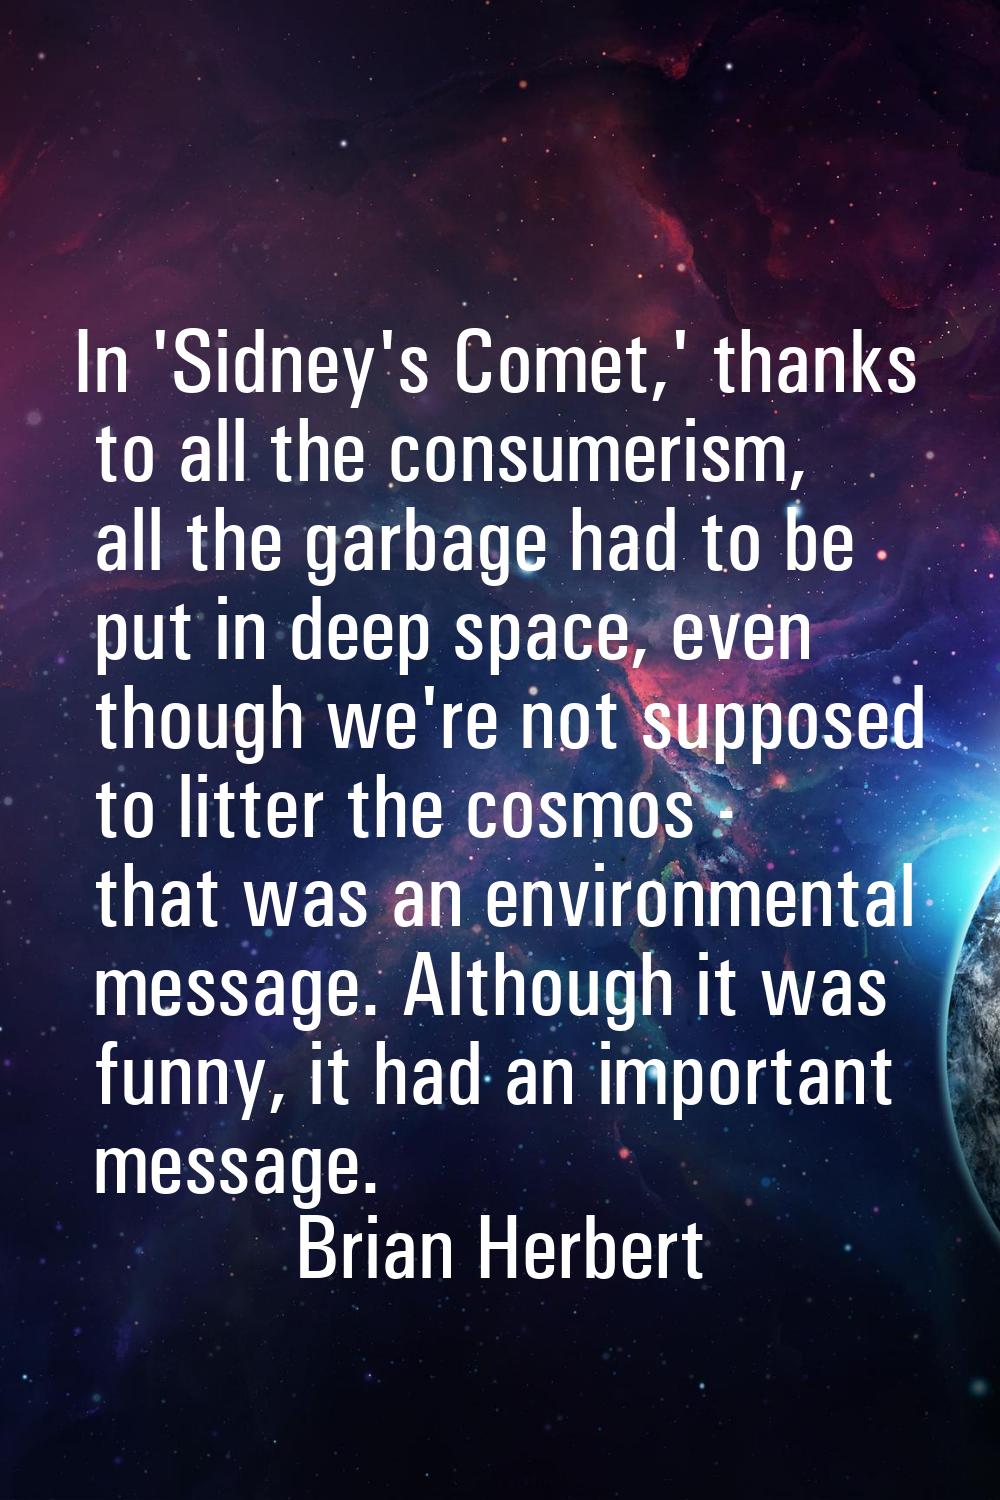 In 'Sidney's Comet,' thanks to all the consumerism, all the garbage had to be put in deep space, ev